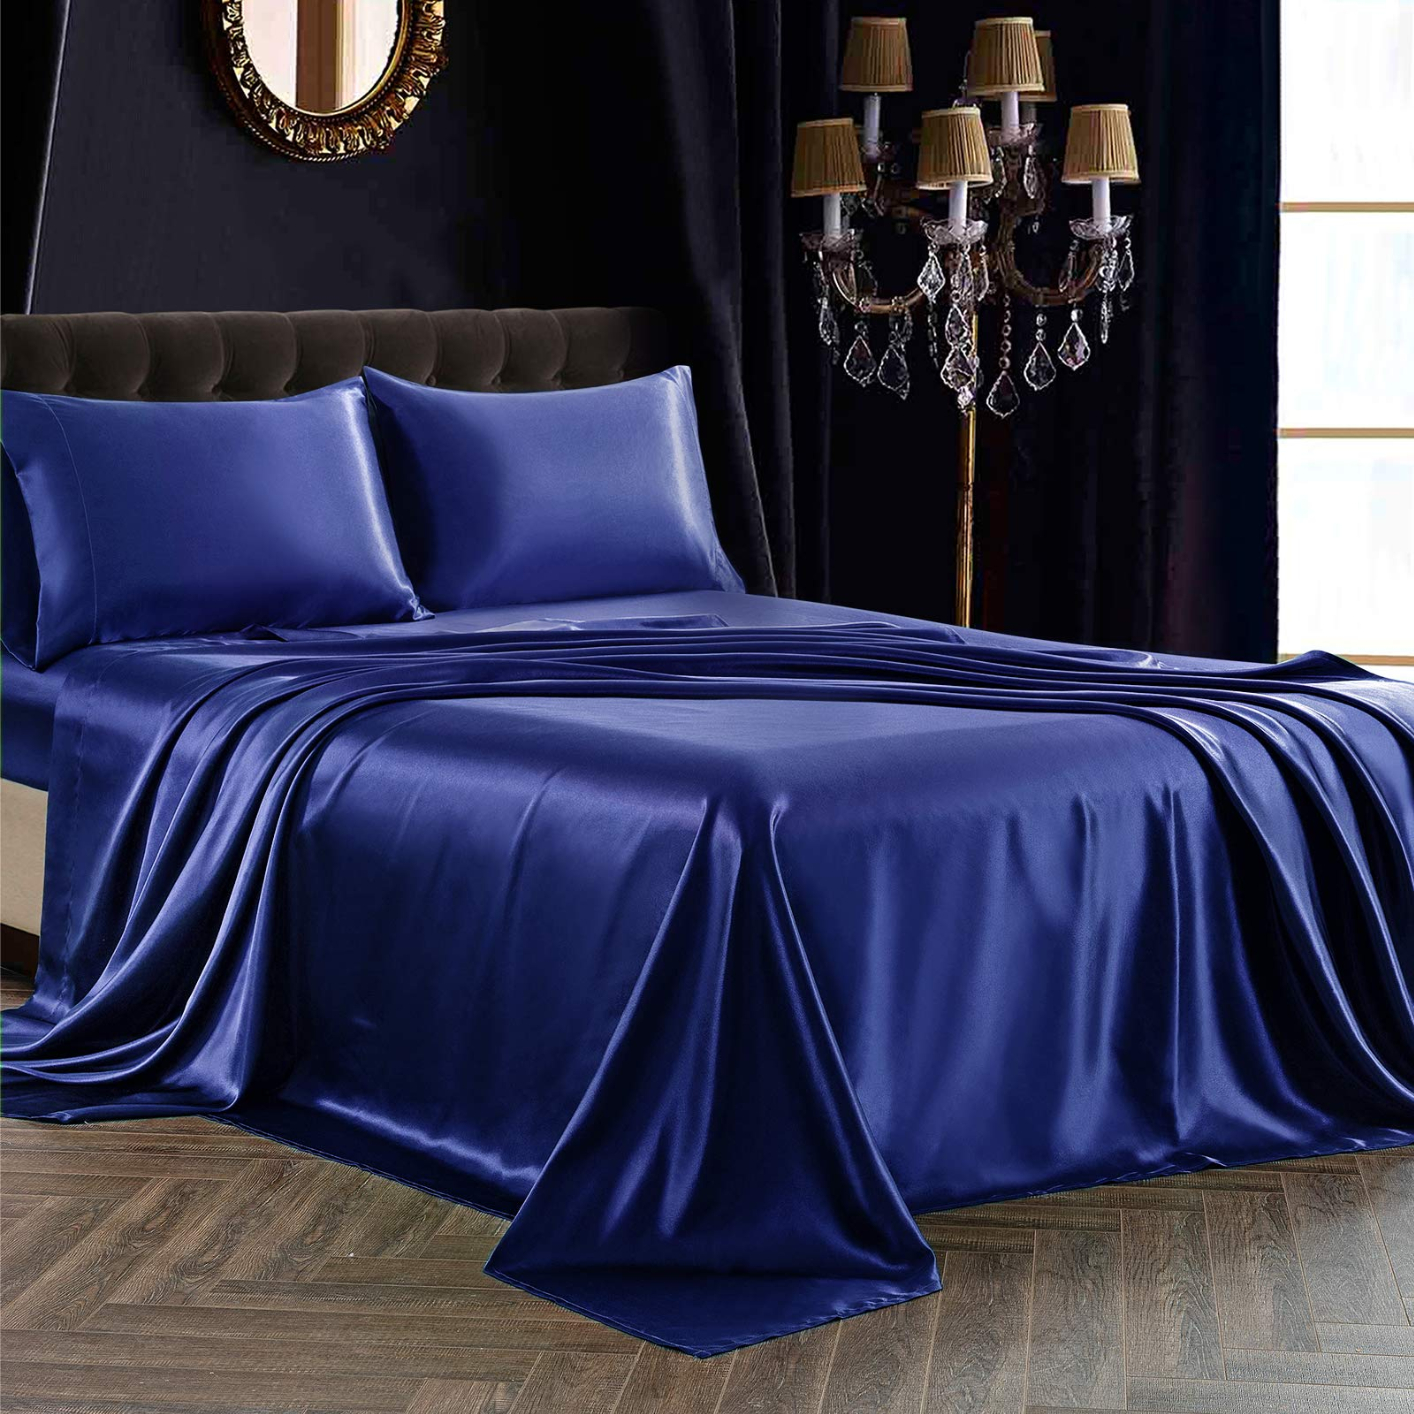 JT013-32 4Pcs Satin Sheets Set Twin Size Sheets Sheets Silky Breathable Luxury Bedding Sheets with 1 Satin Flat Sheet, Fitted Sheet,2 Pillowcases
